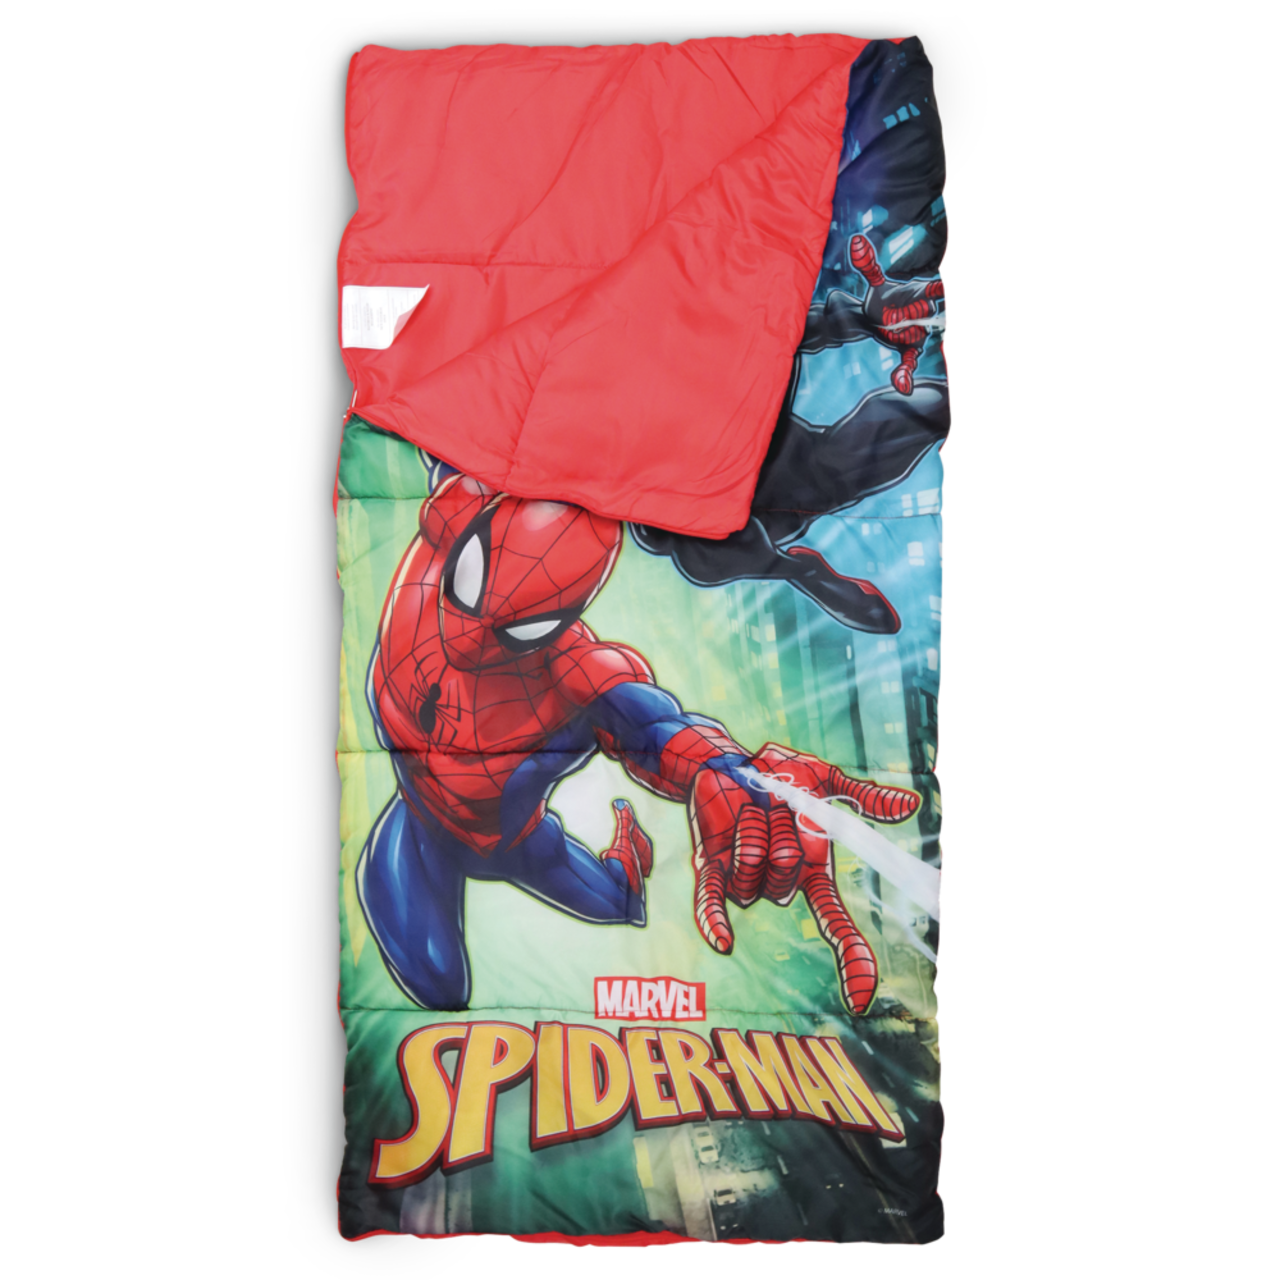 Spiderman Compression Shirt Swing from the rooftops in the limited